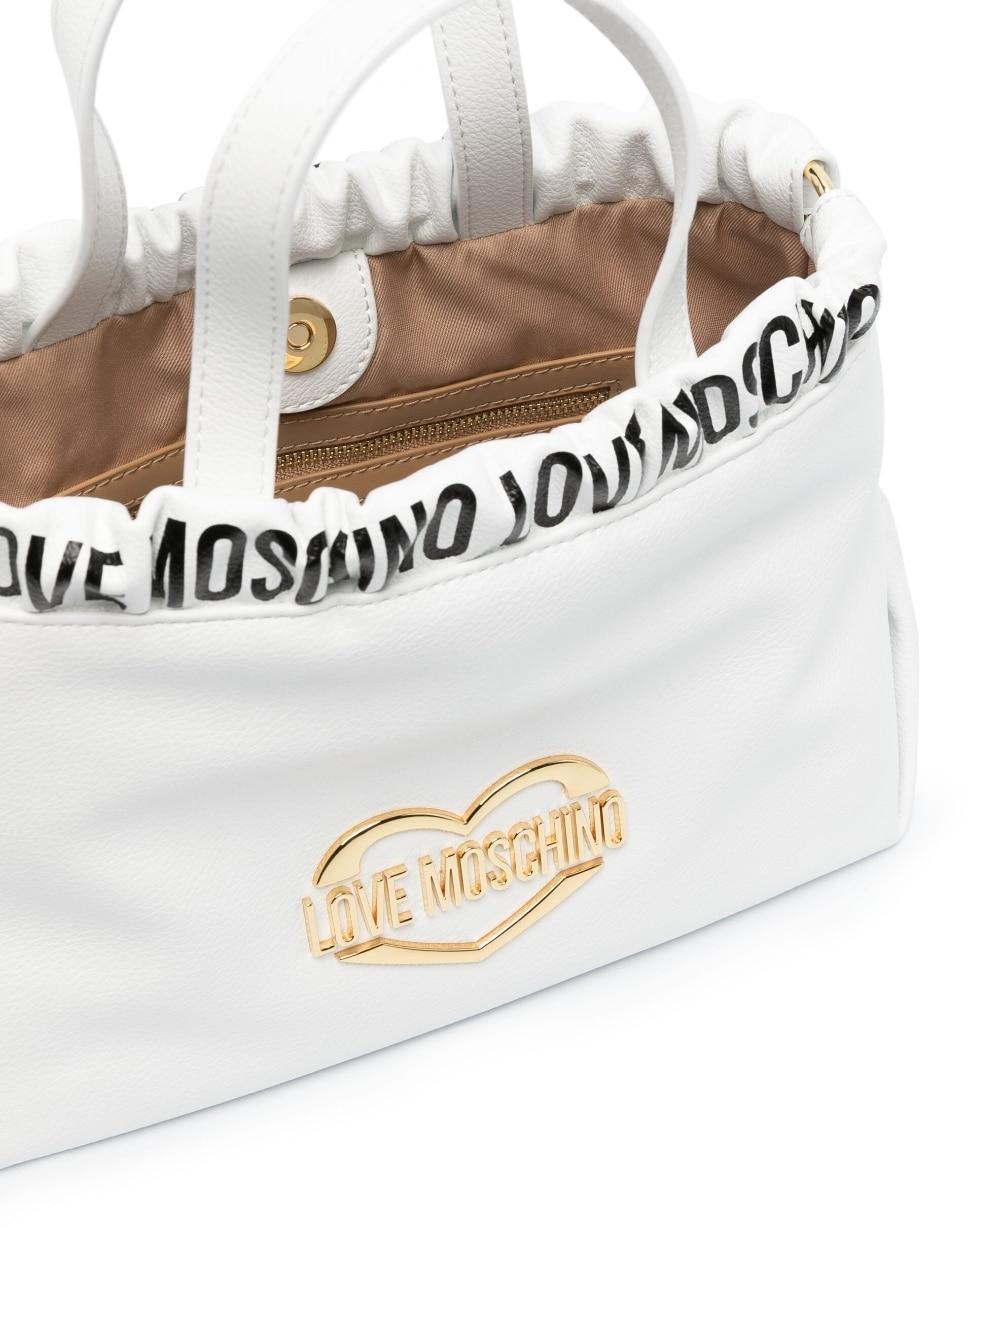 Love Moschino Logo-print Tote Bag in White | Lyst